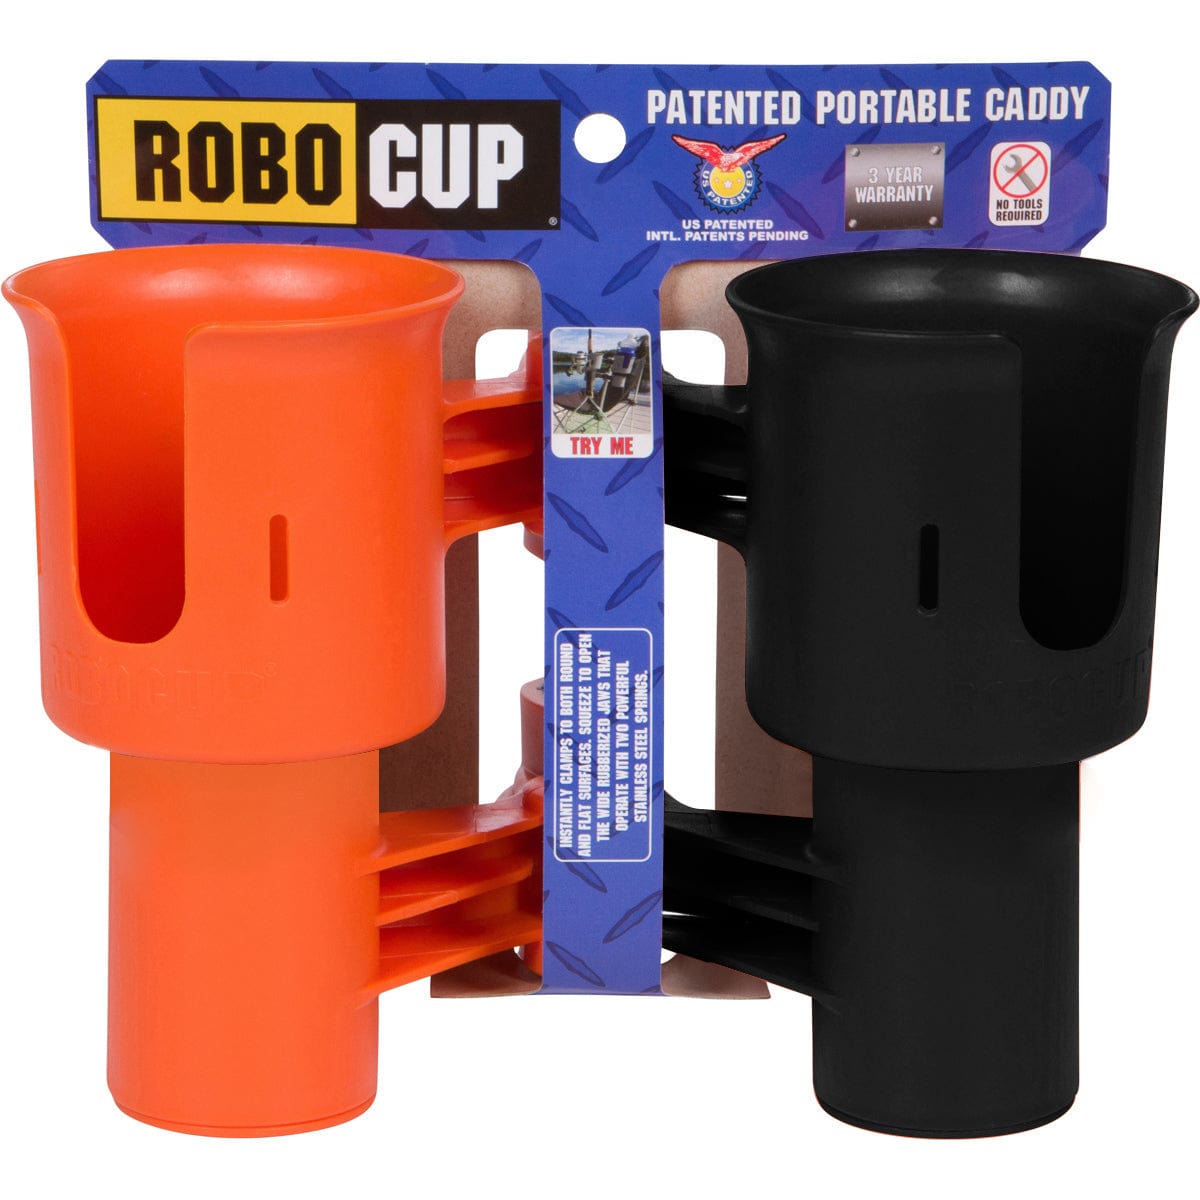 RoboCup GRAY, Patented Portable Caddy Tote, Cup Holder, Organizer,  Clampable Clip On Holder for Two Drinks, Cups, Bottles, Liquids, Rods, Drum  Sticks, Tools and more